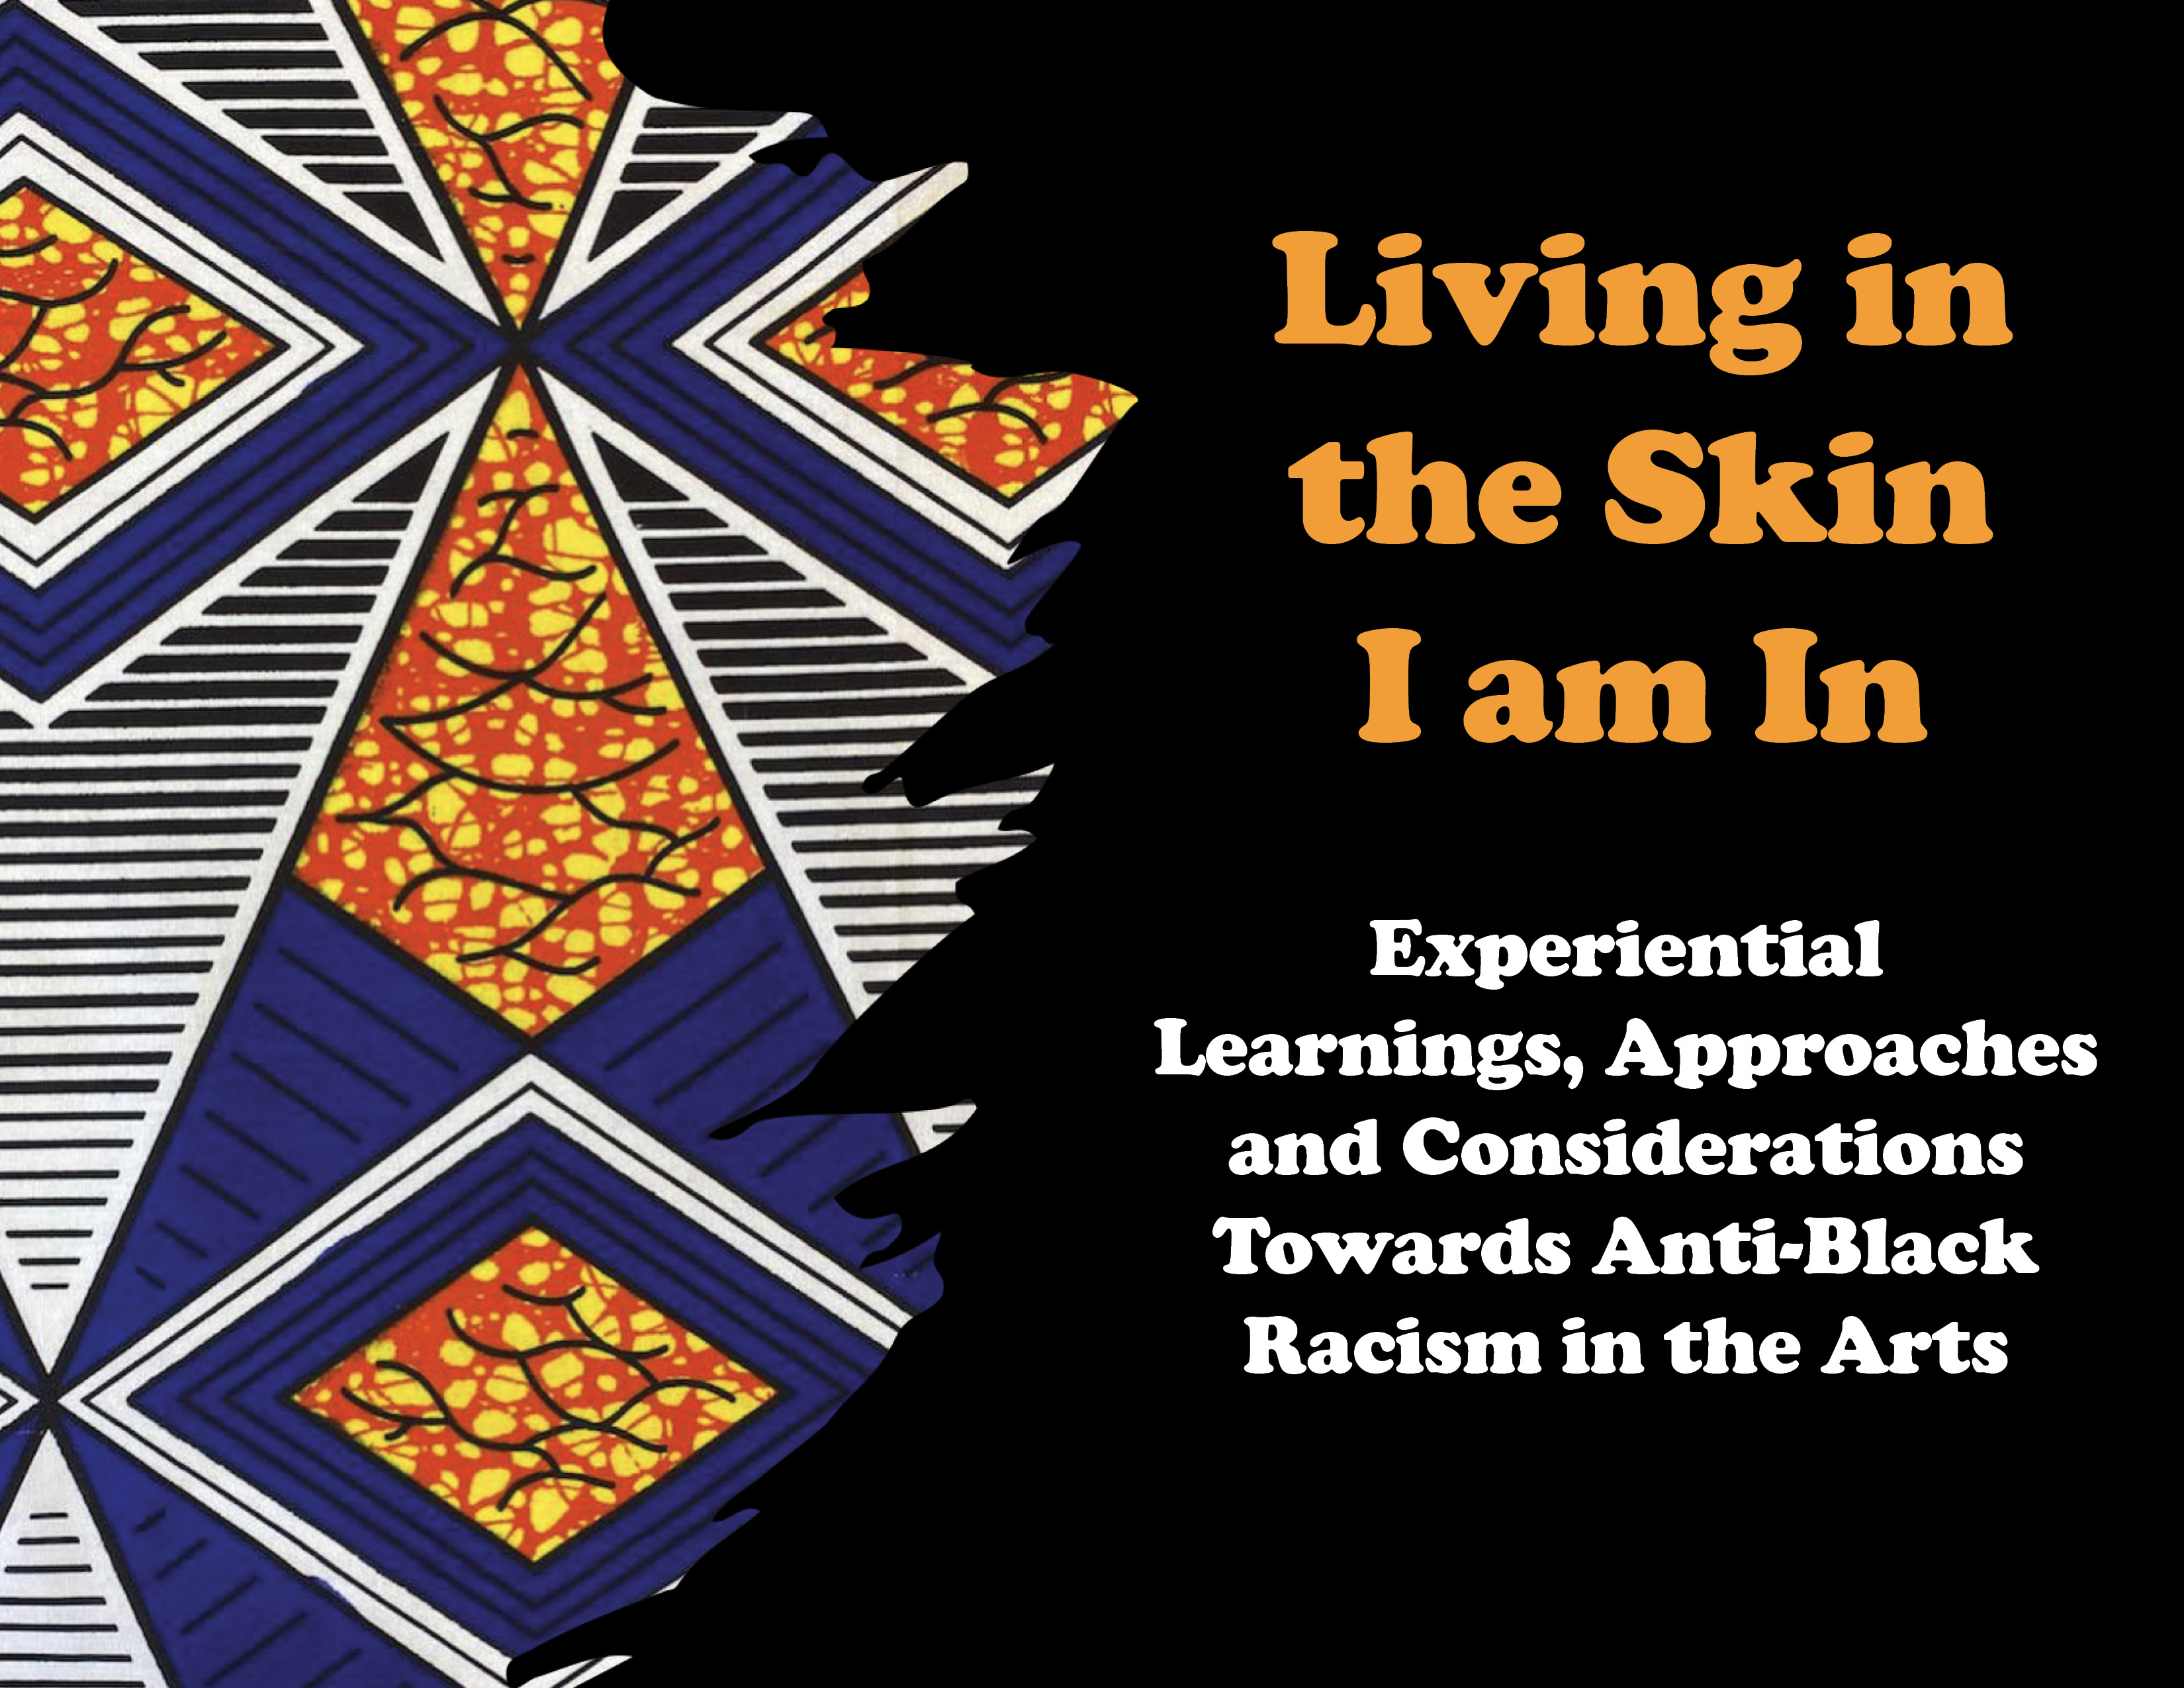 Image of the book cover: an abstract pattern on the right side and on the left side white text on black background, the text is: Living in the Skin I am In, Experiential Learnings, Approaches and Considerations Towards Anti-Black Racism in the Arts